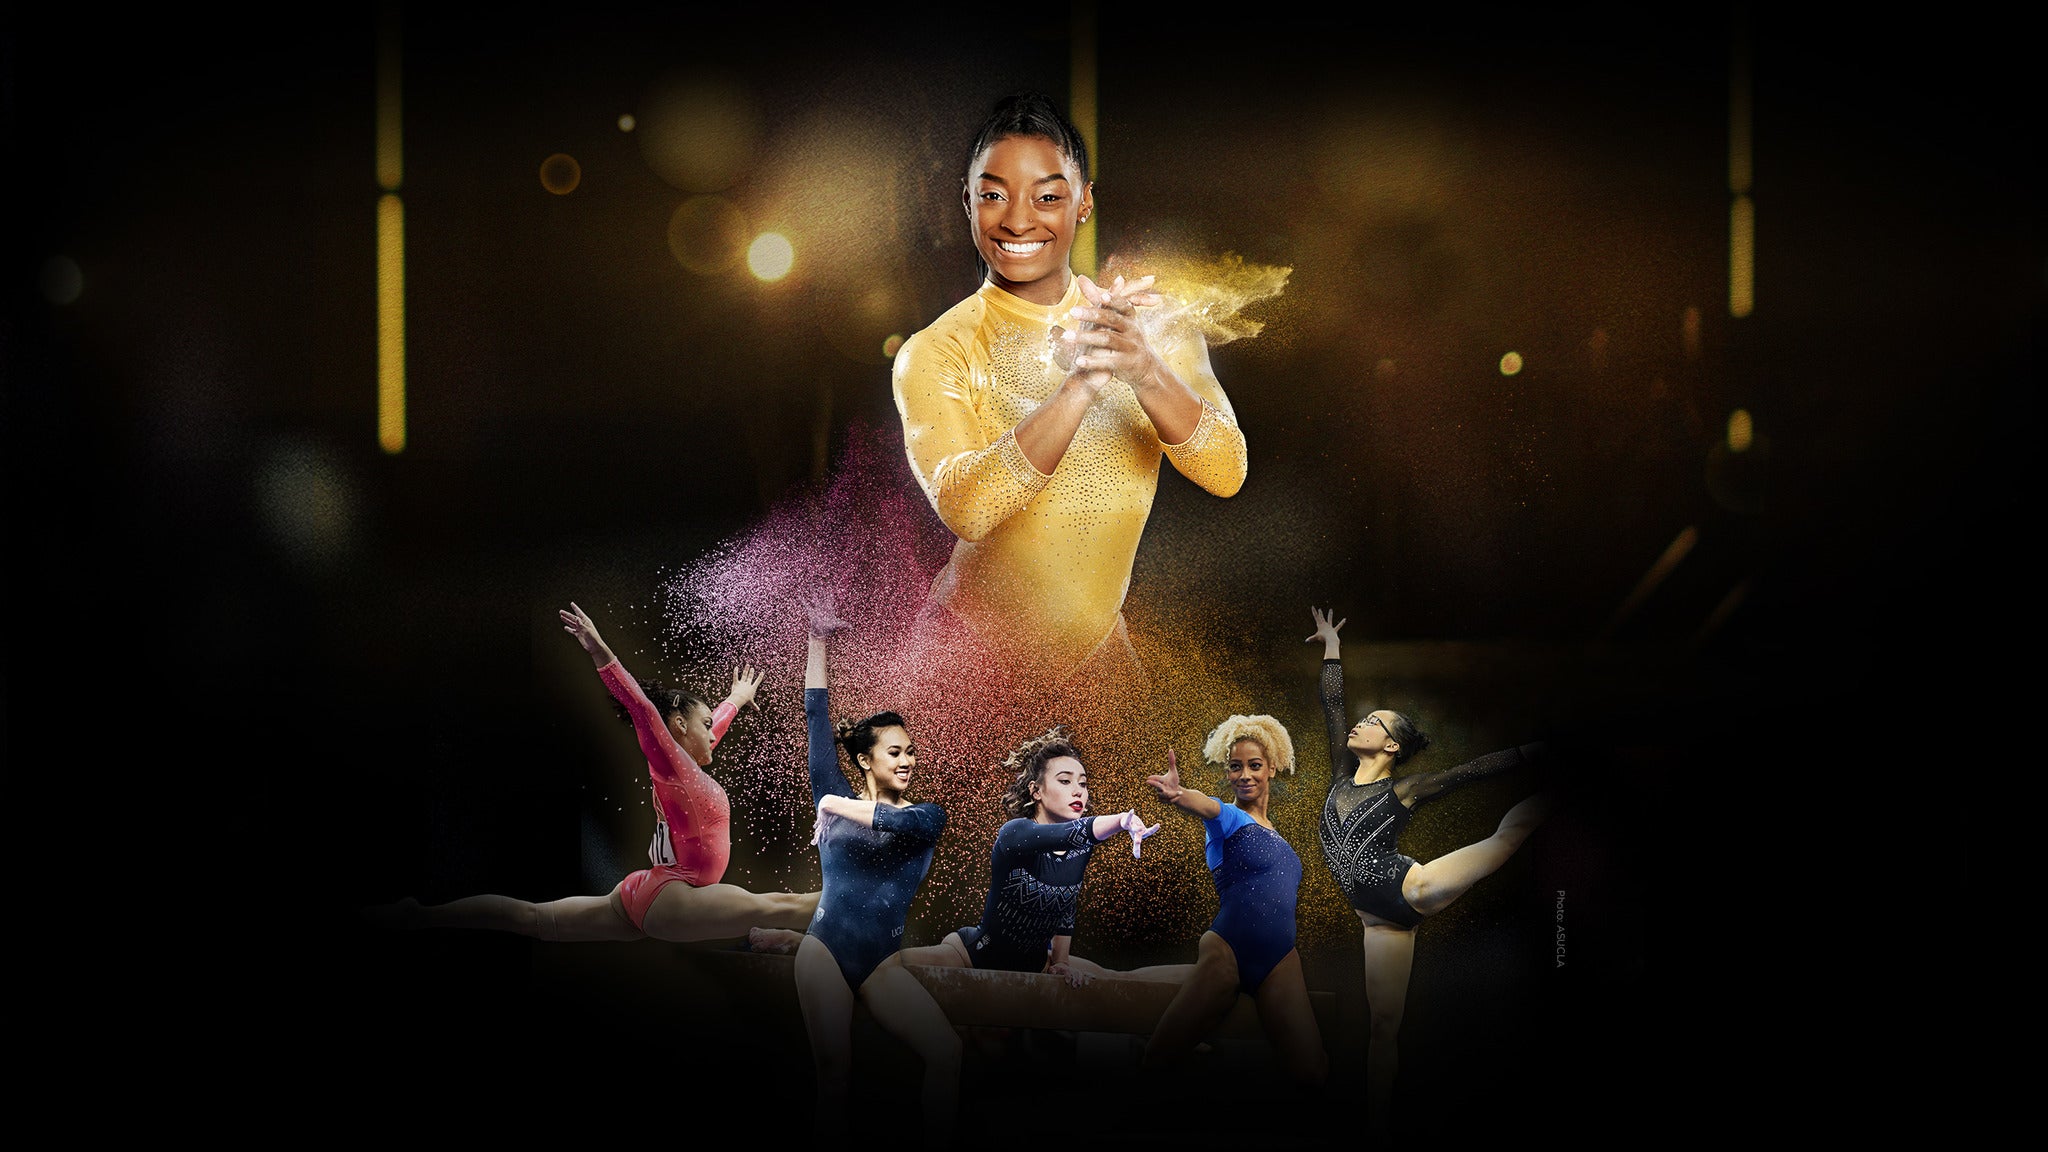 G.O.A.T. Gold Over America Tour Starring Simone Biles in North Little Rock promo photo for AEG presale offer code